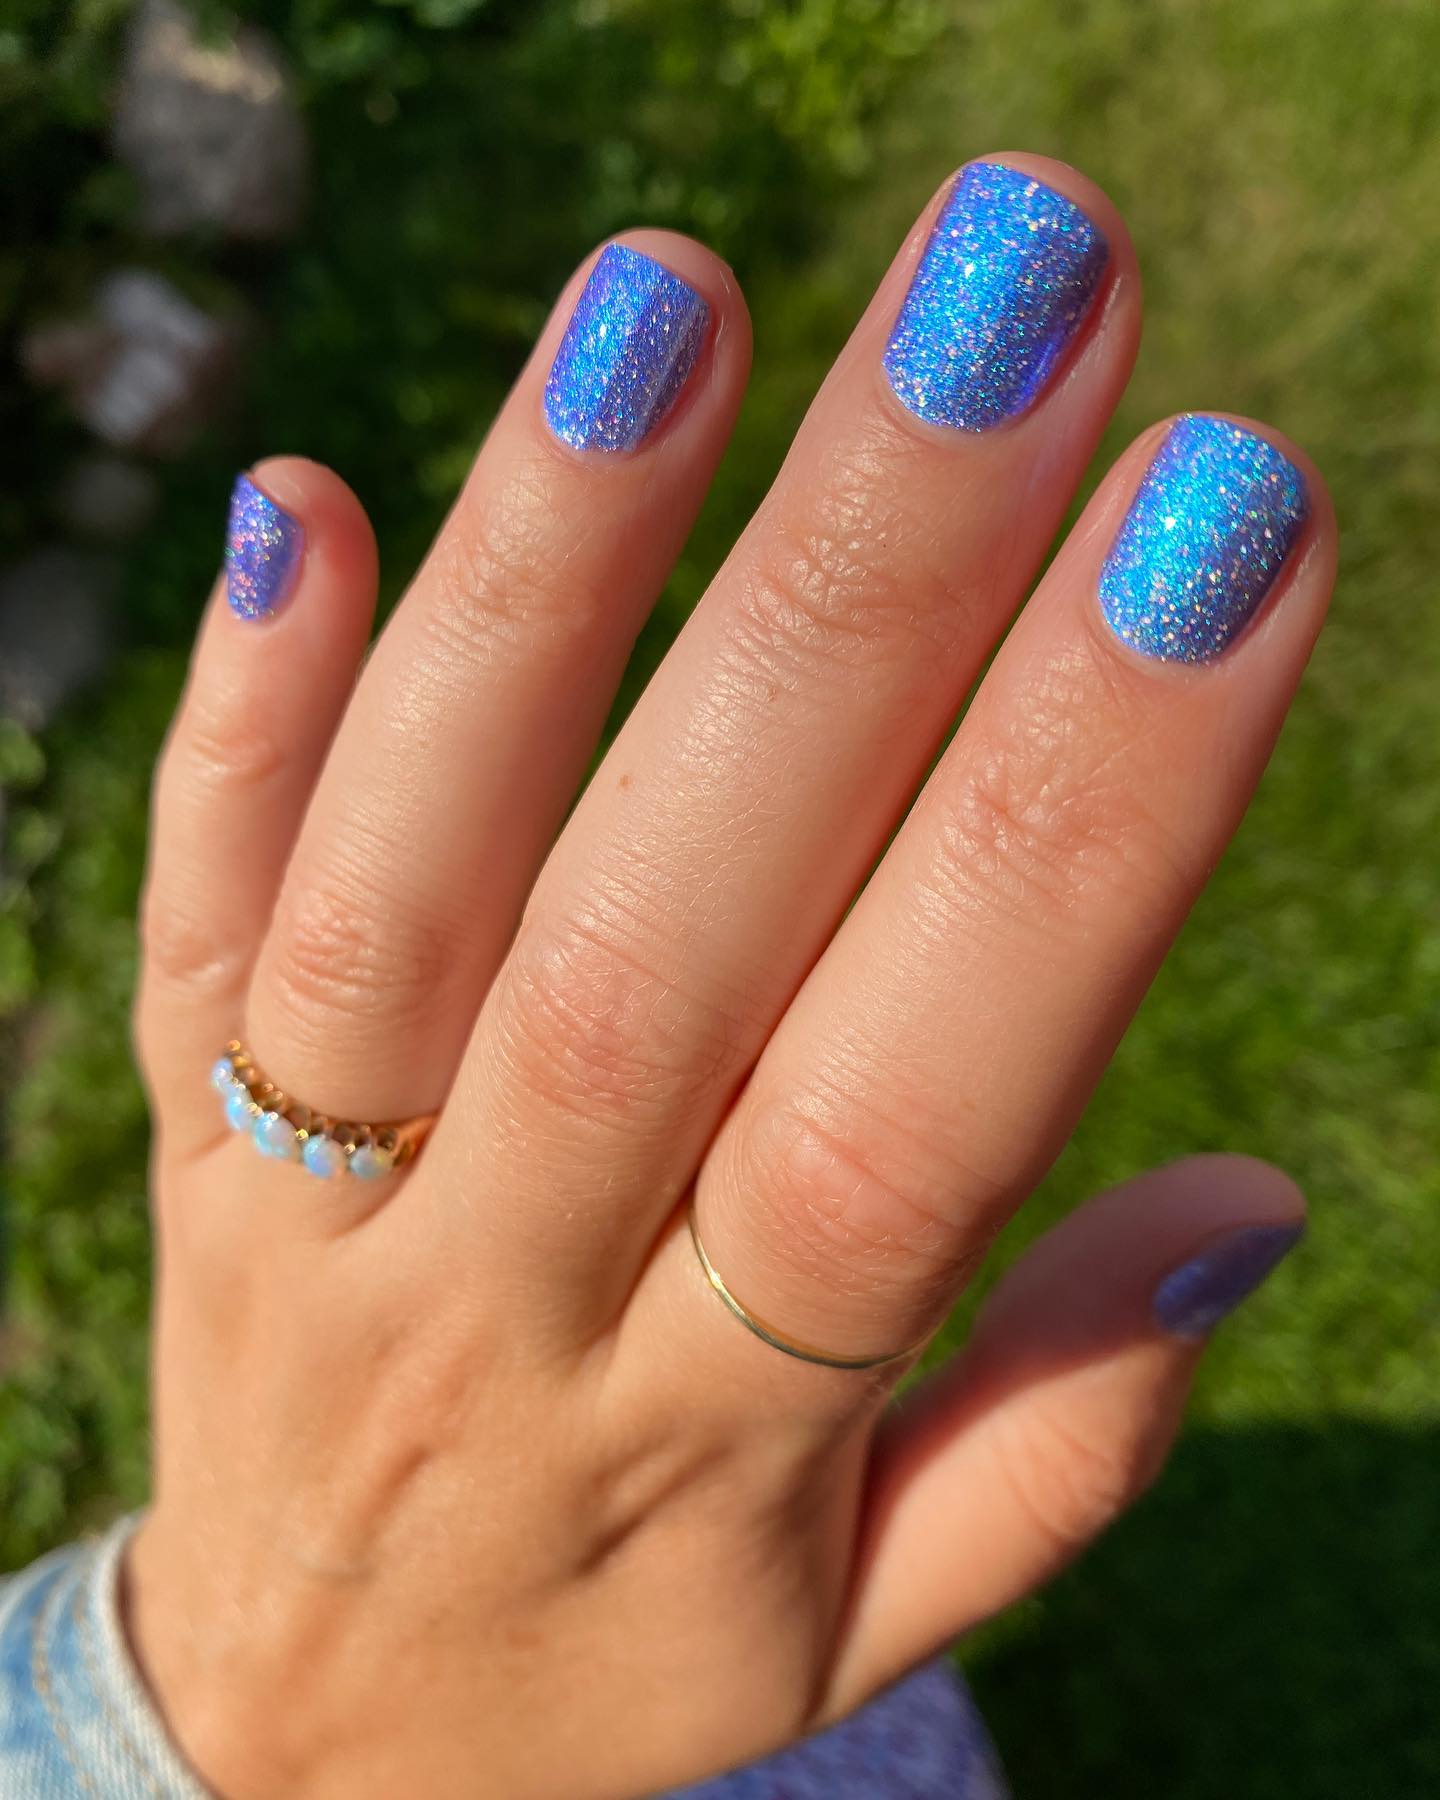 Blue glitter nails are a great way to add a little bit of sparkle to your look. They're perfect for holiday parties, or anytime you want to feel a little extra glam and they look amazing on your short nails.